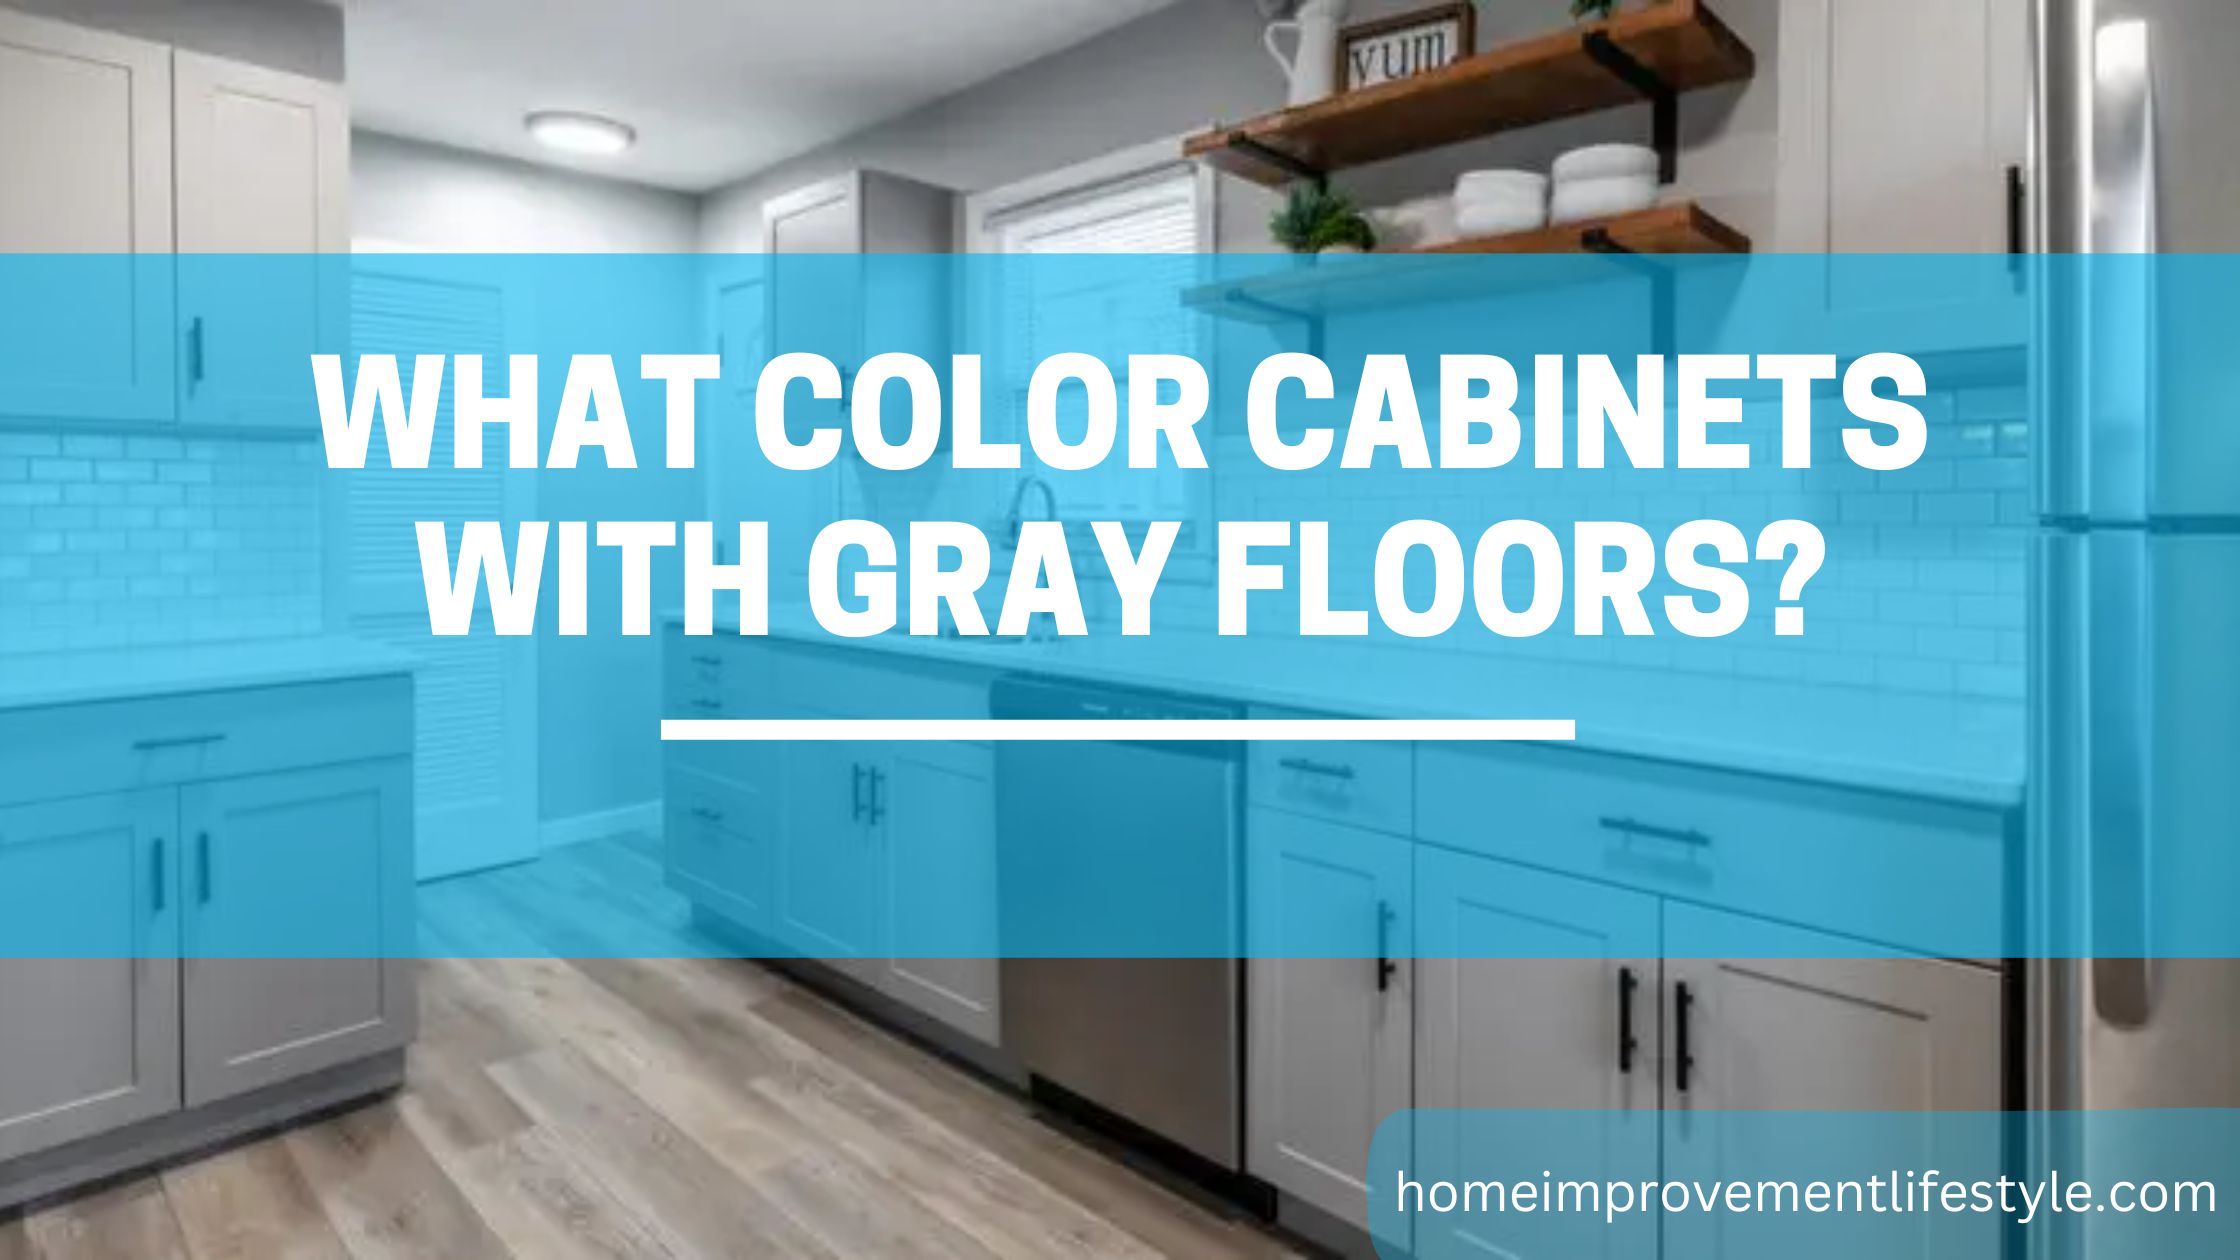 What Color Cabinets With Gray Floors